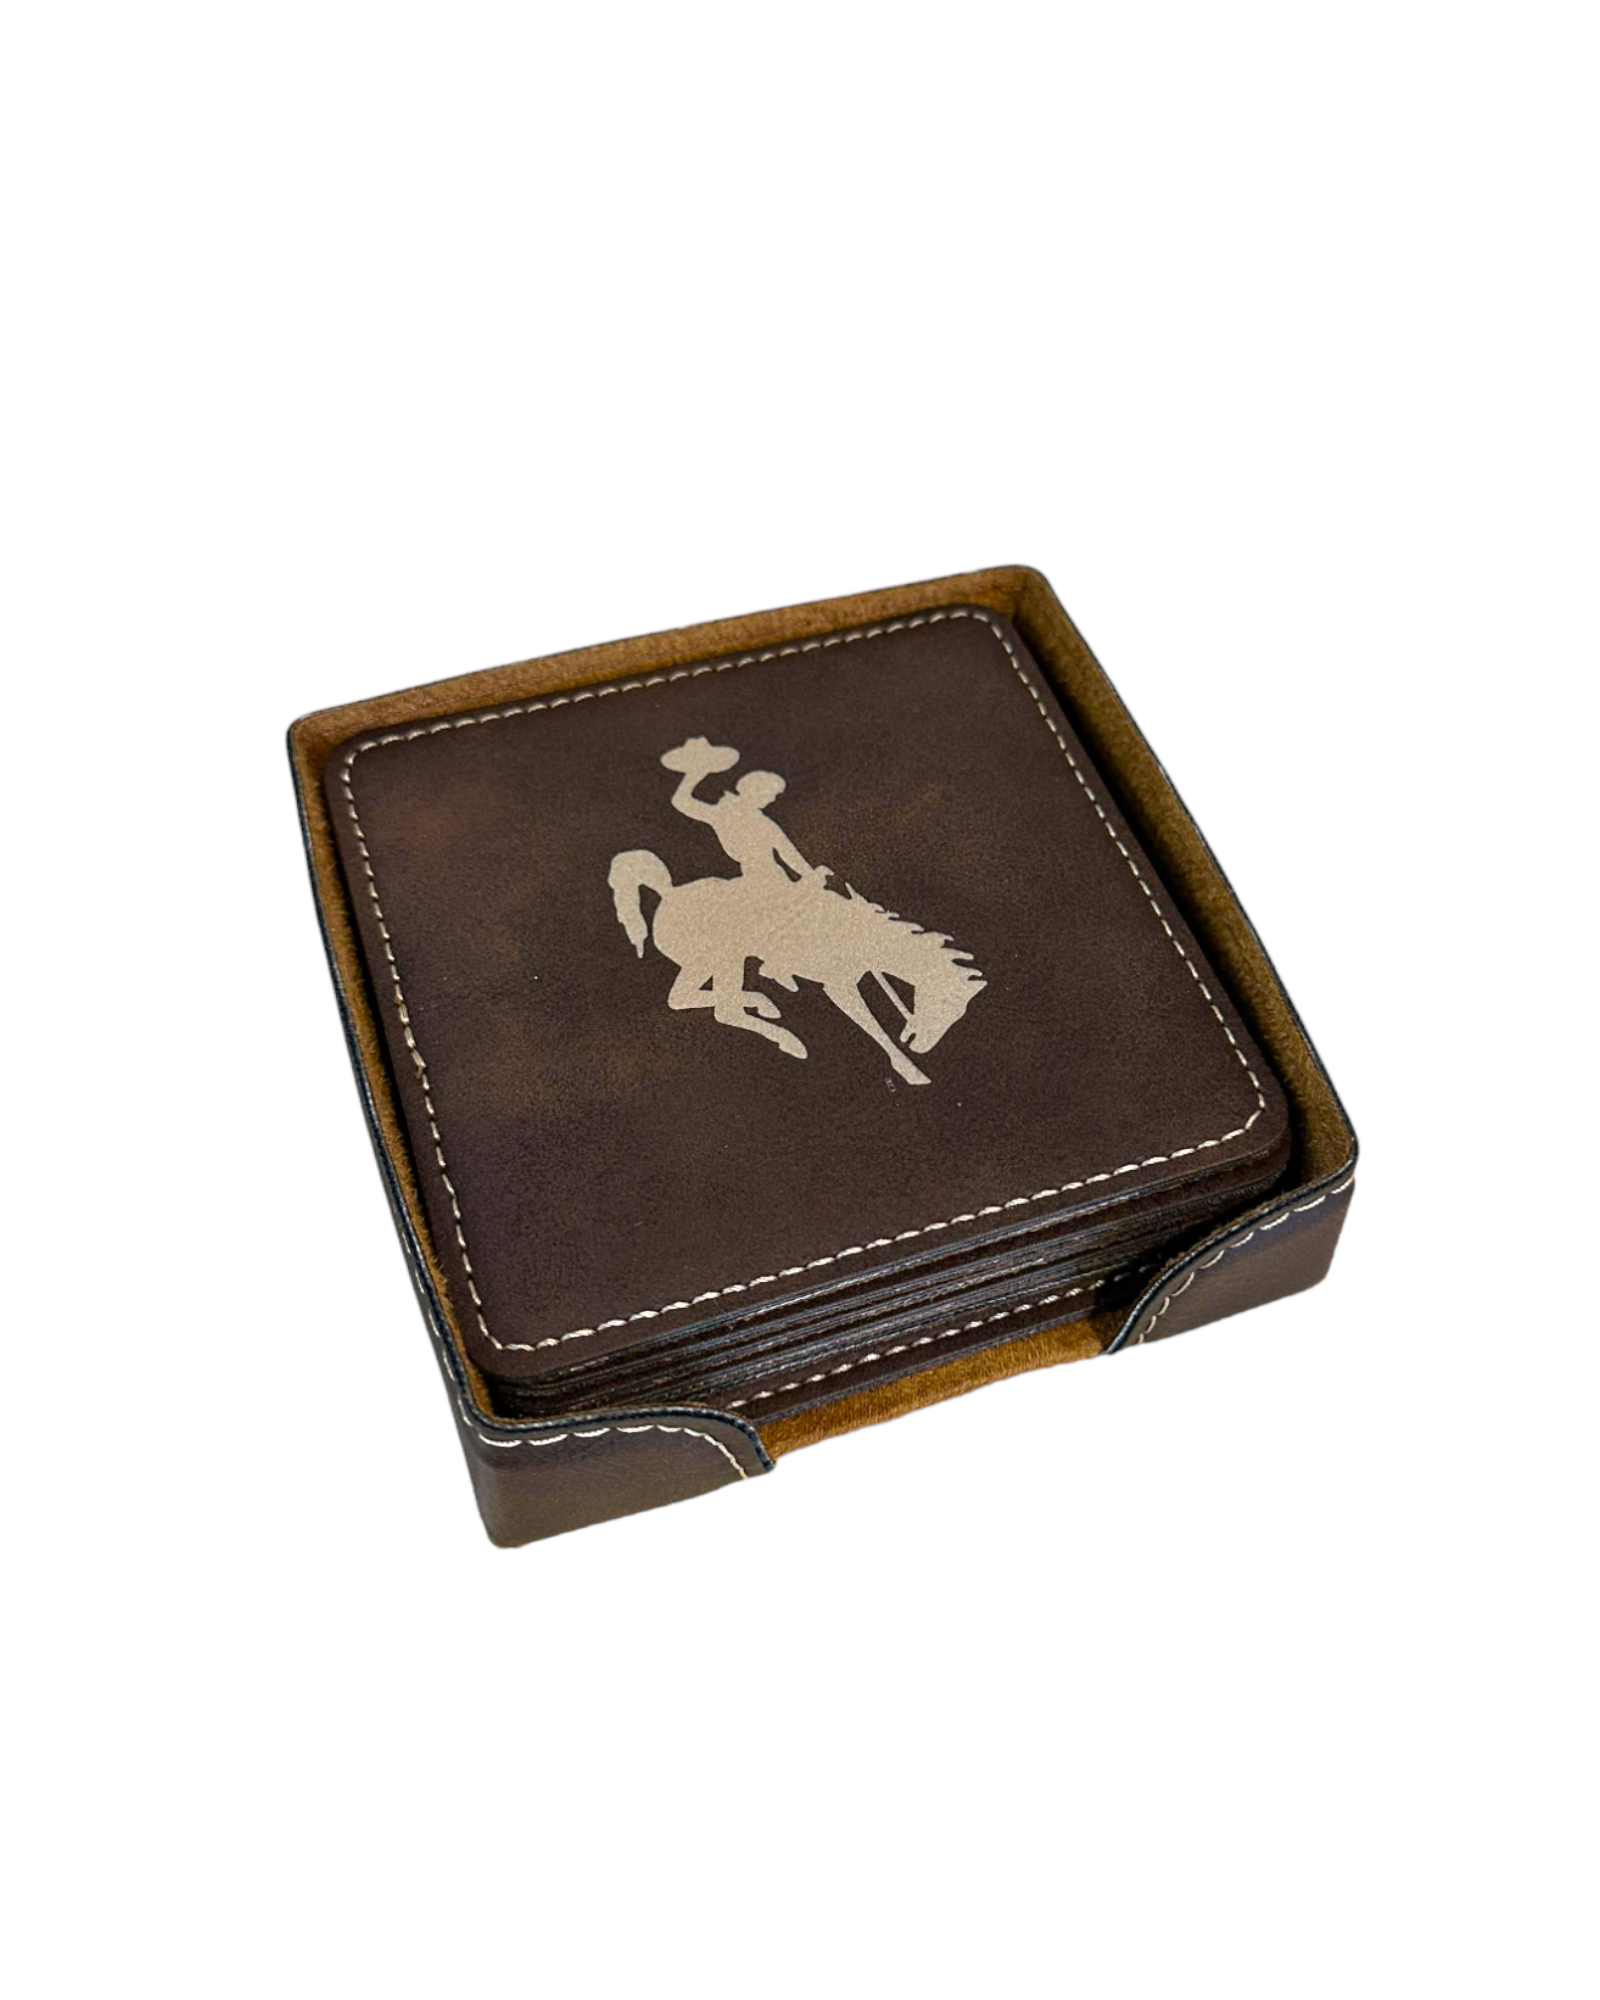 Our Wyoming Steamboat Leatherette Coasters bring an air of classic Western charm to your home!